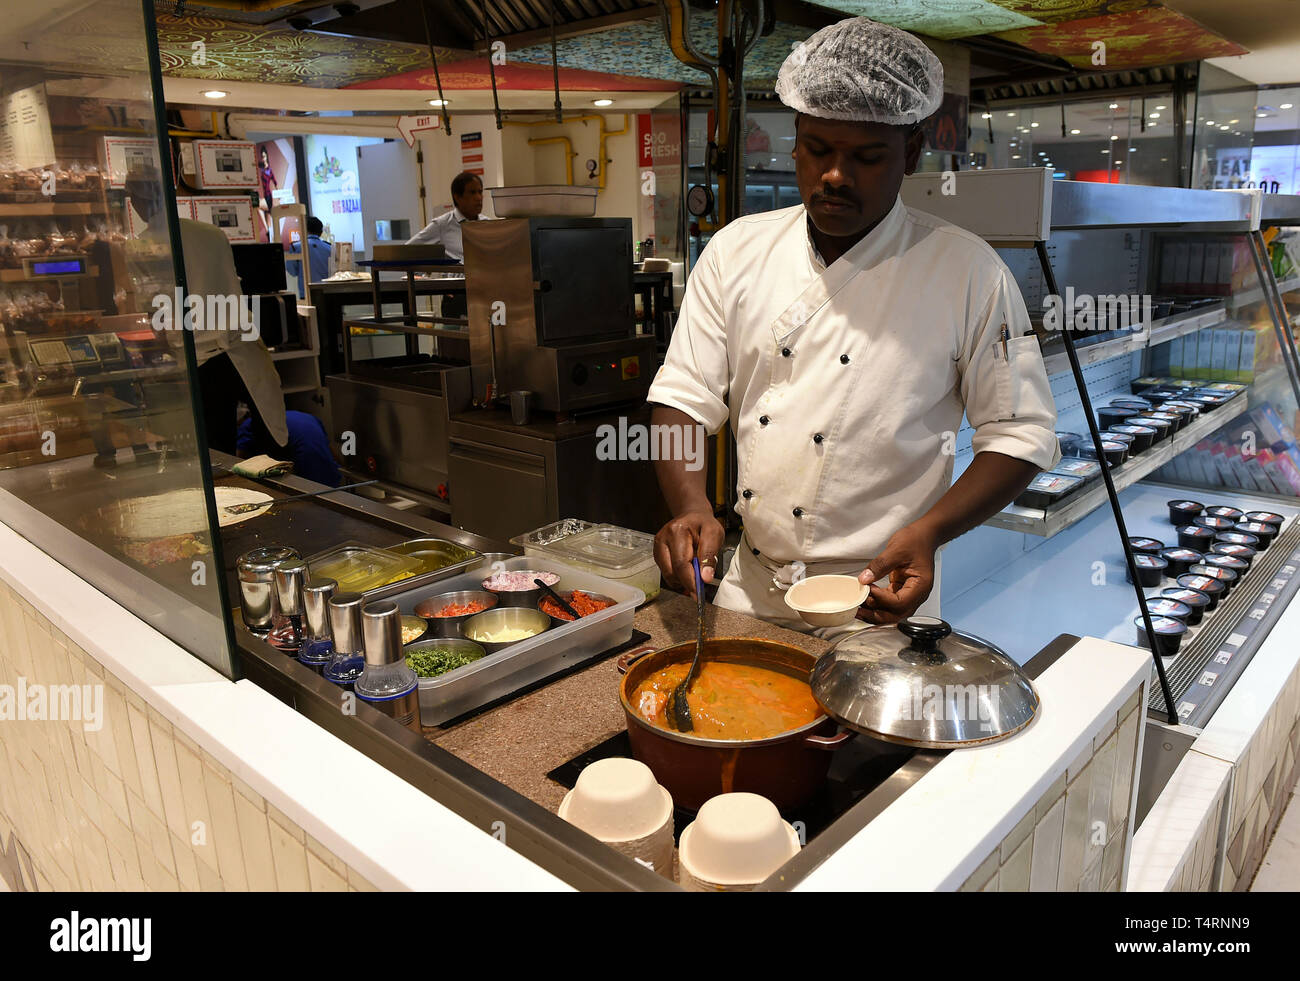 New Delhi, India. 18th Apr, 2019. An Indian chef serves curry soup for a customer at a supermarket in New Delhi, India, April 18, 2019. Dosa, a crispy paper-thin wrap with a spicy potato filling, eaten dipped in a tangy soup and a special sauce or chutney, is popular in southern India. Credit: Zhang Naijie/Xinhua/Alamy Live News Stock Photo